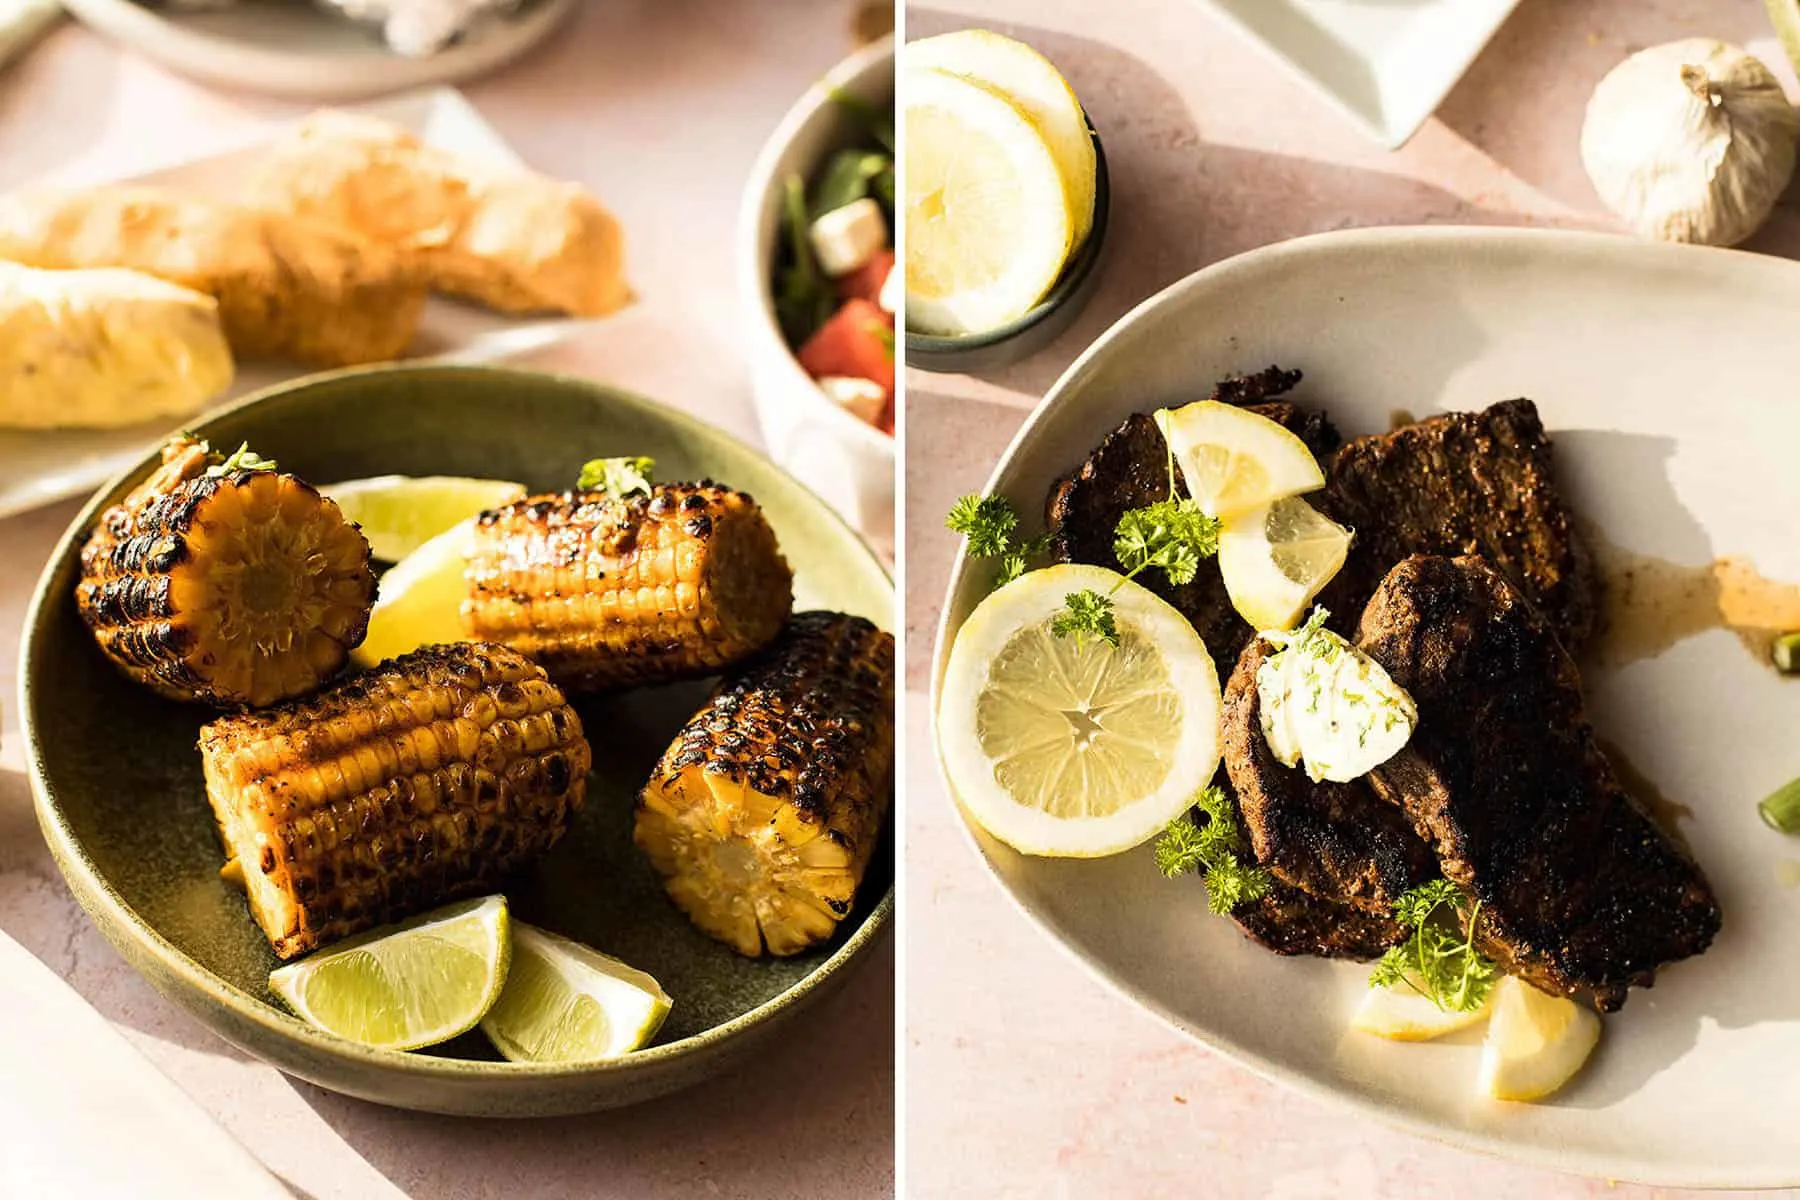 Diptych of grilled corn and grilled steak.